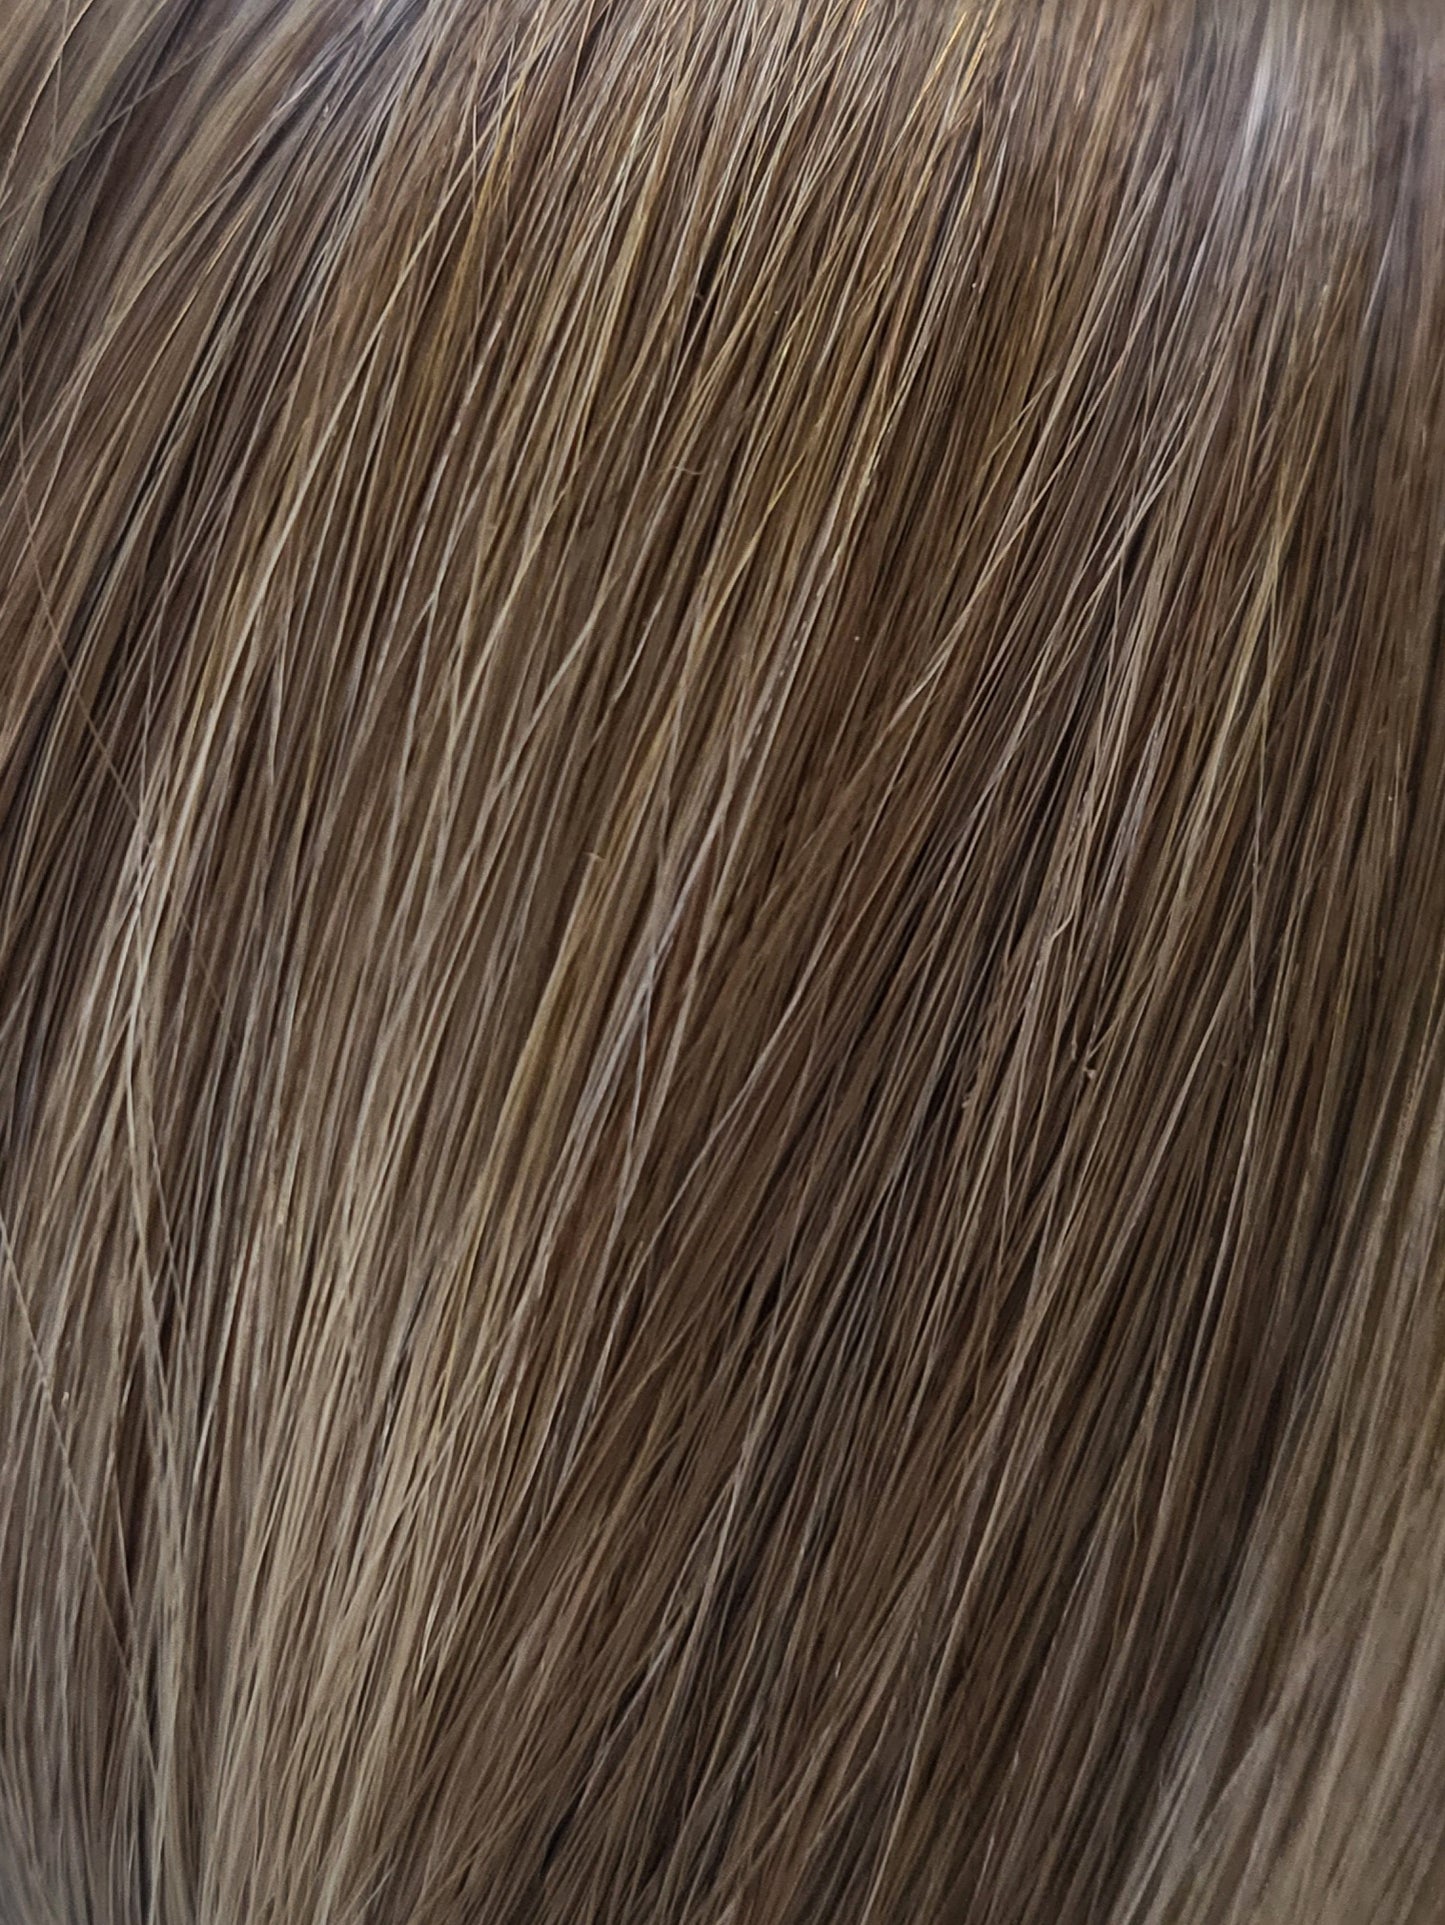 INVISIBLE TAPE IN HAIR EXTENSIONS-P6/601-Light Brown-Purest Blonde 20 inch  